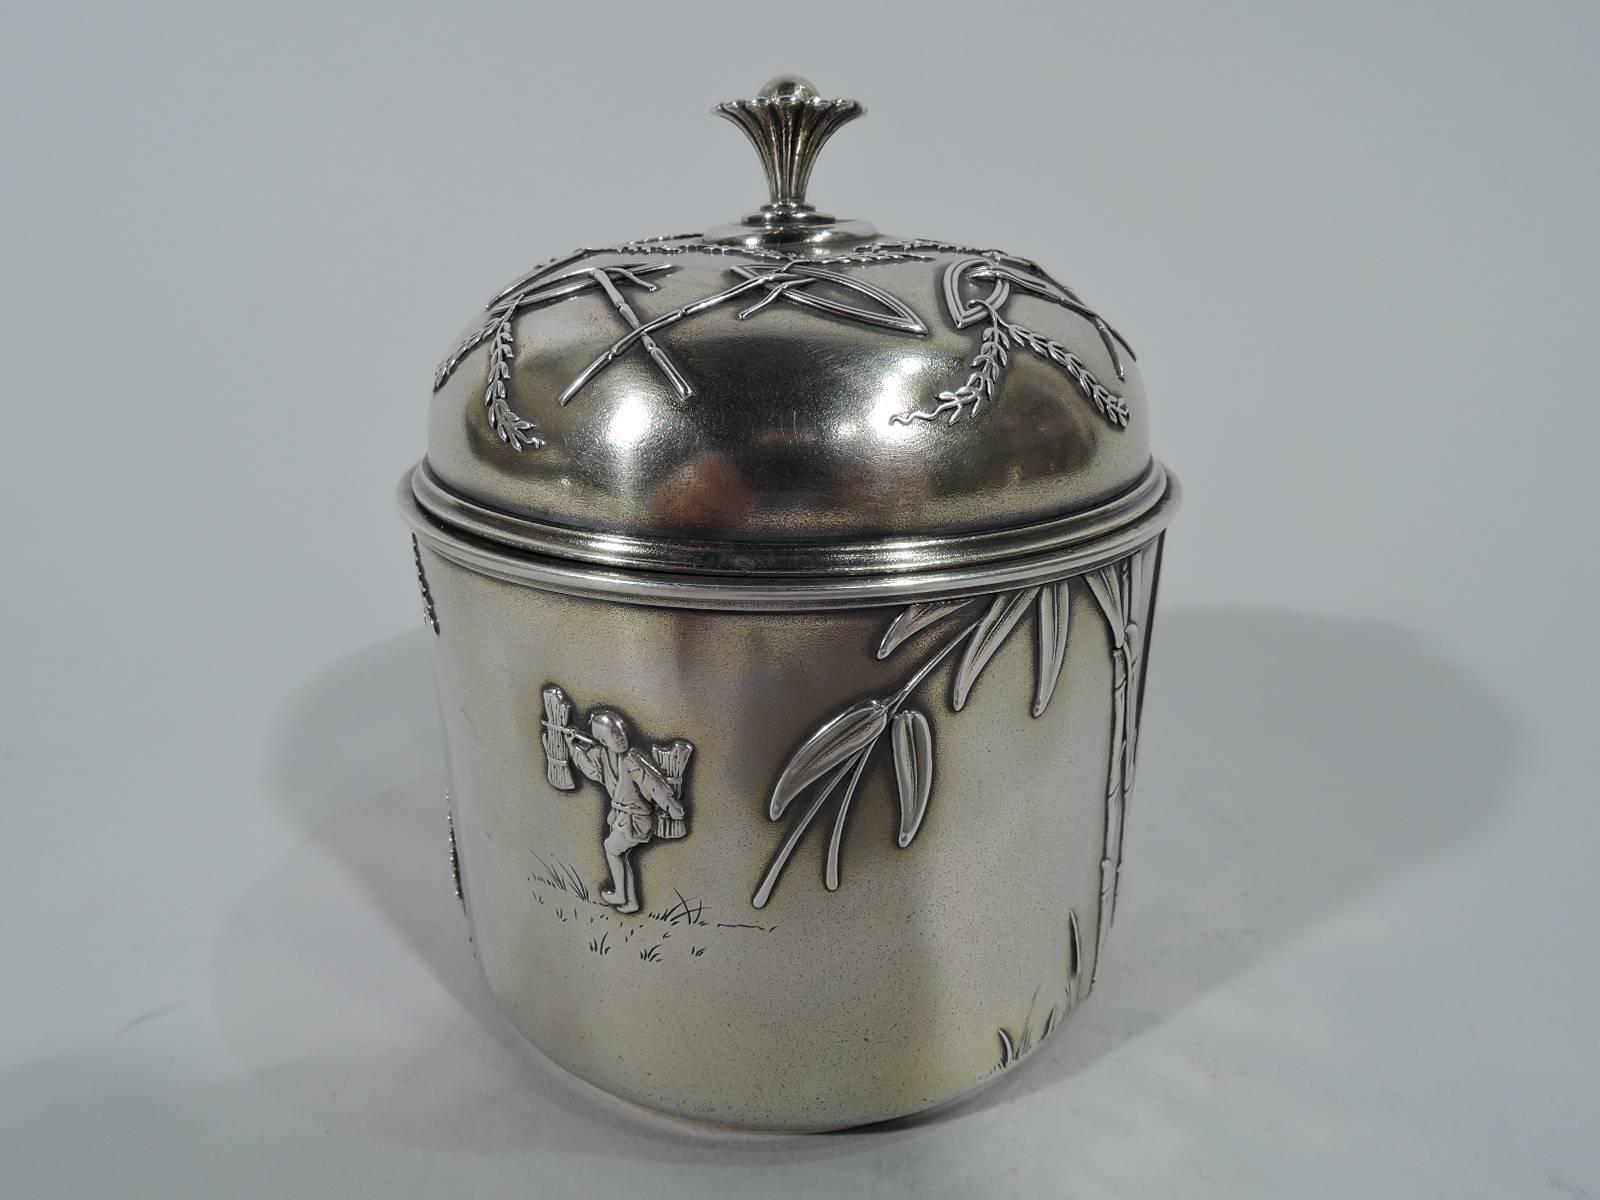 American Early Tiffany Aesthetic Japonesque Sterling Silver Tea Caddy